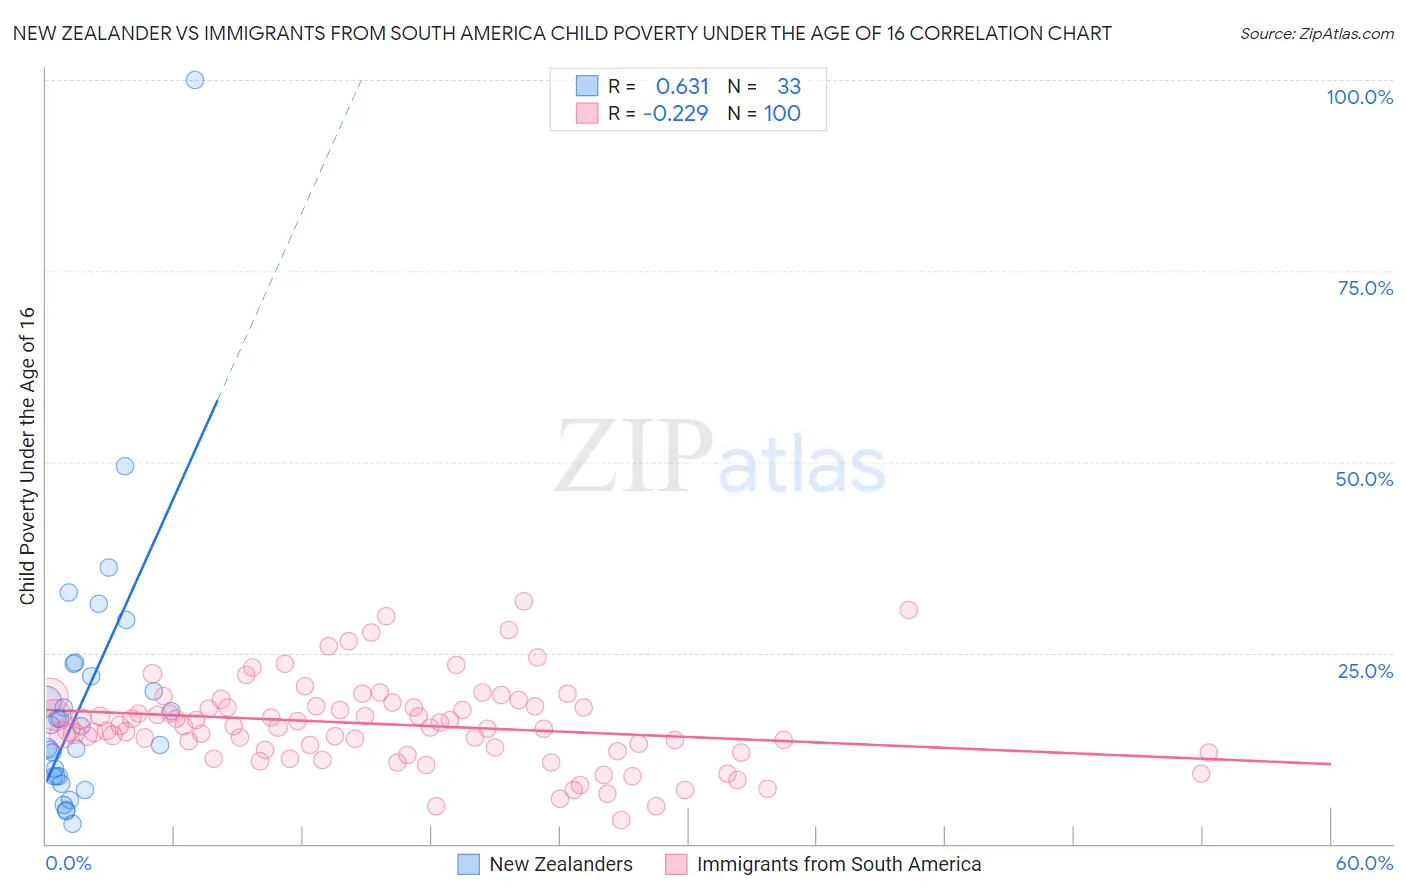 New Zealander vs Immigrants from South America Child Poverty Under the Age of 16